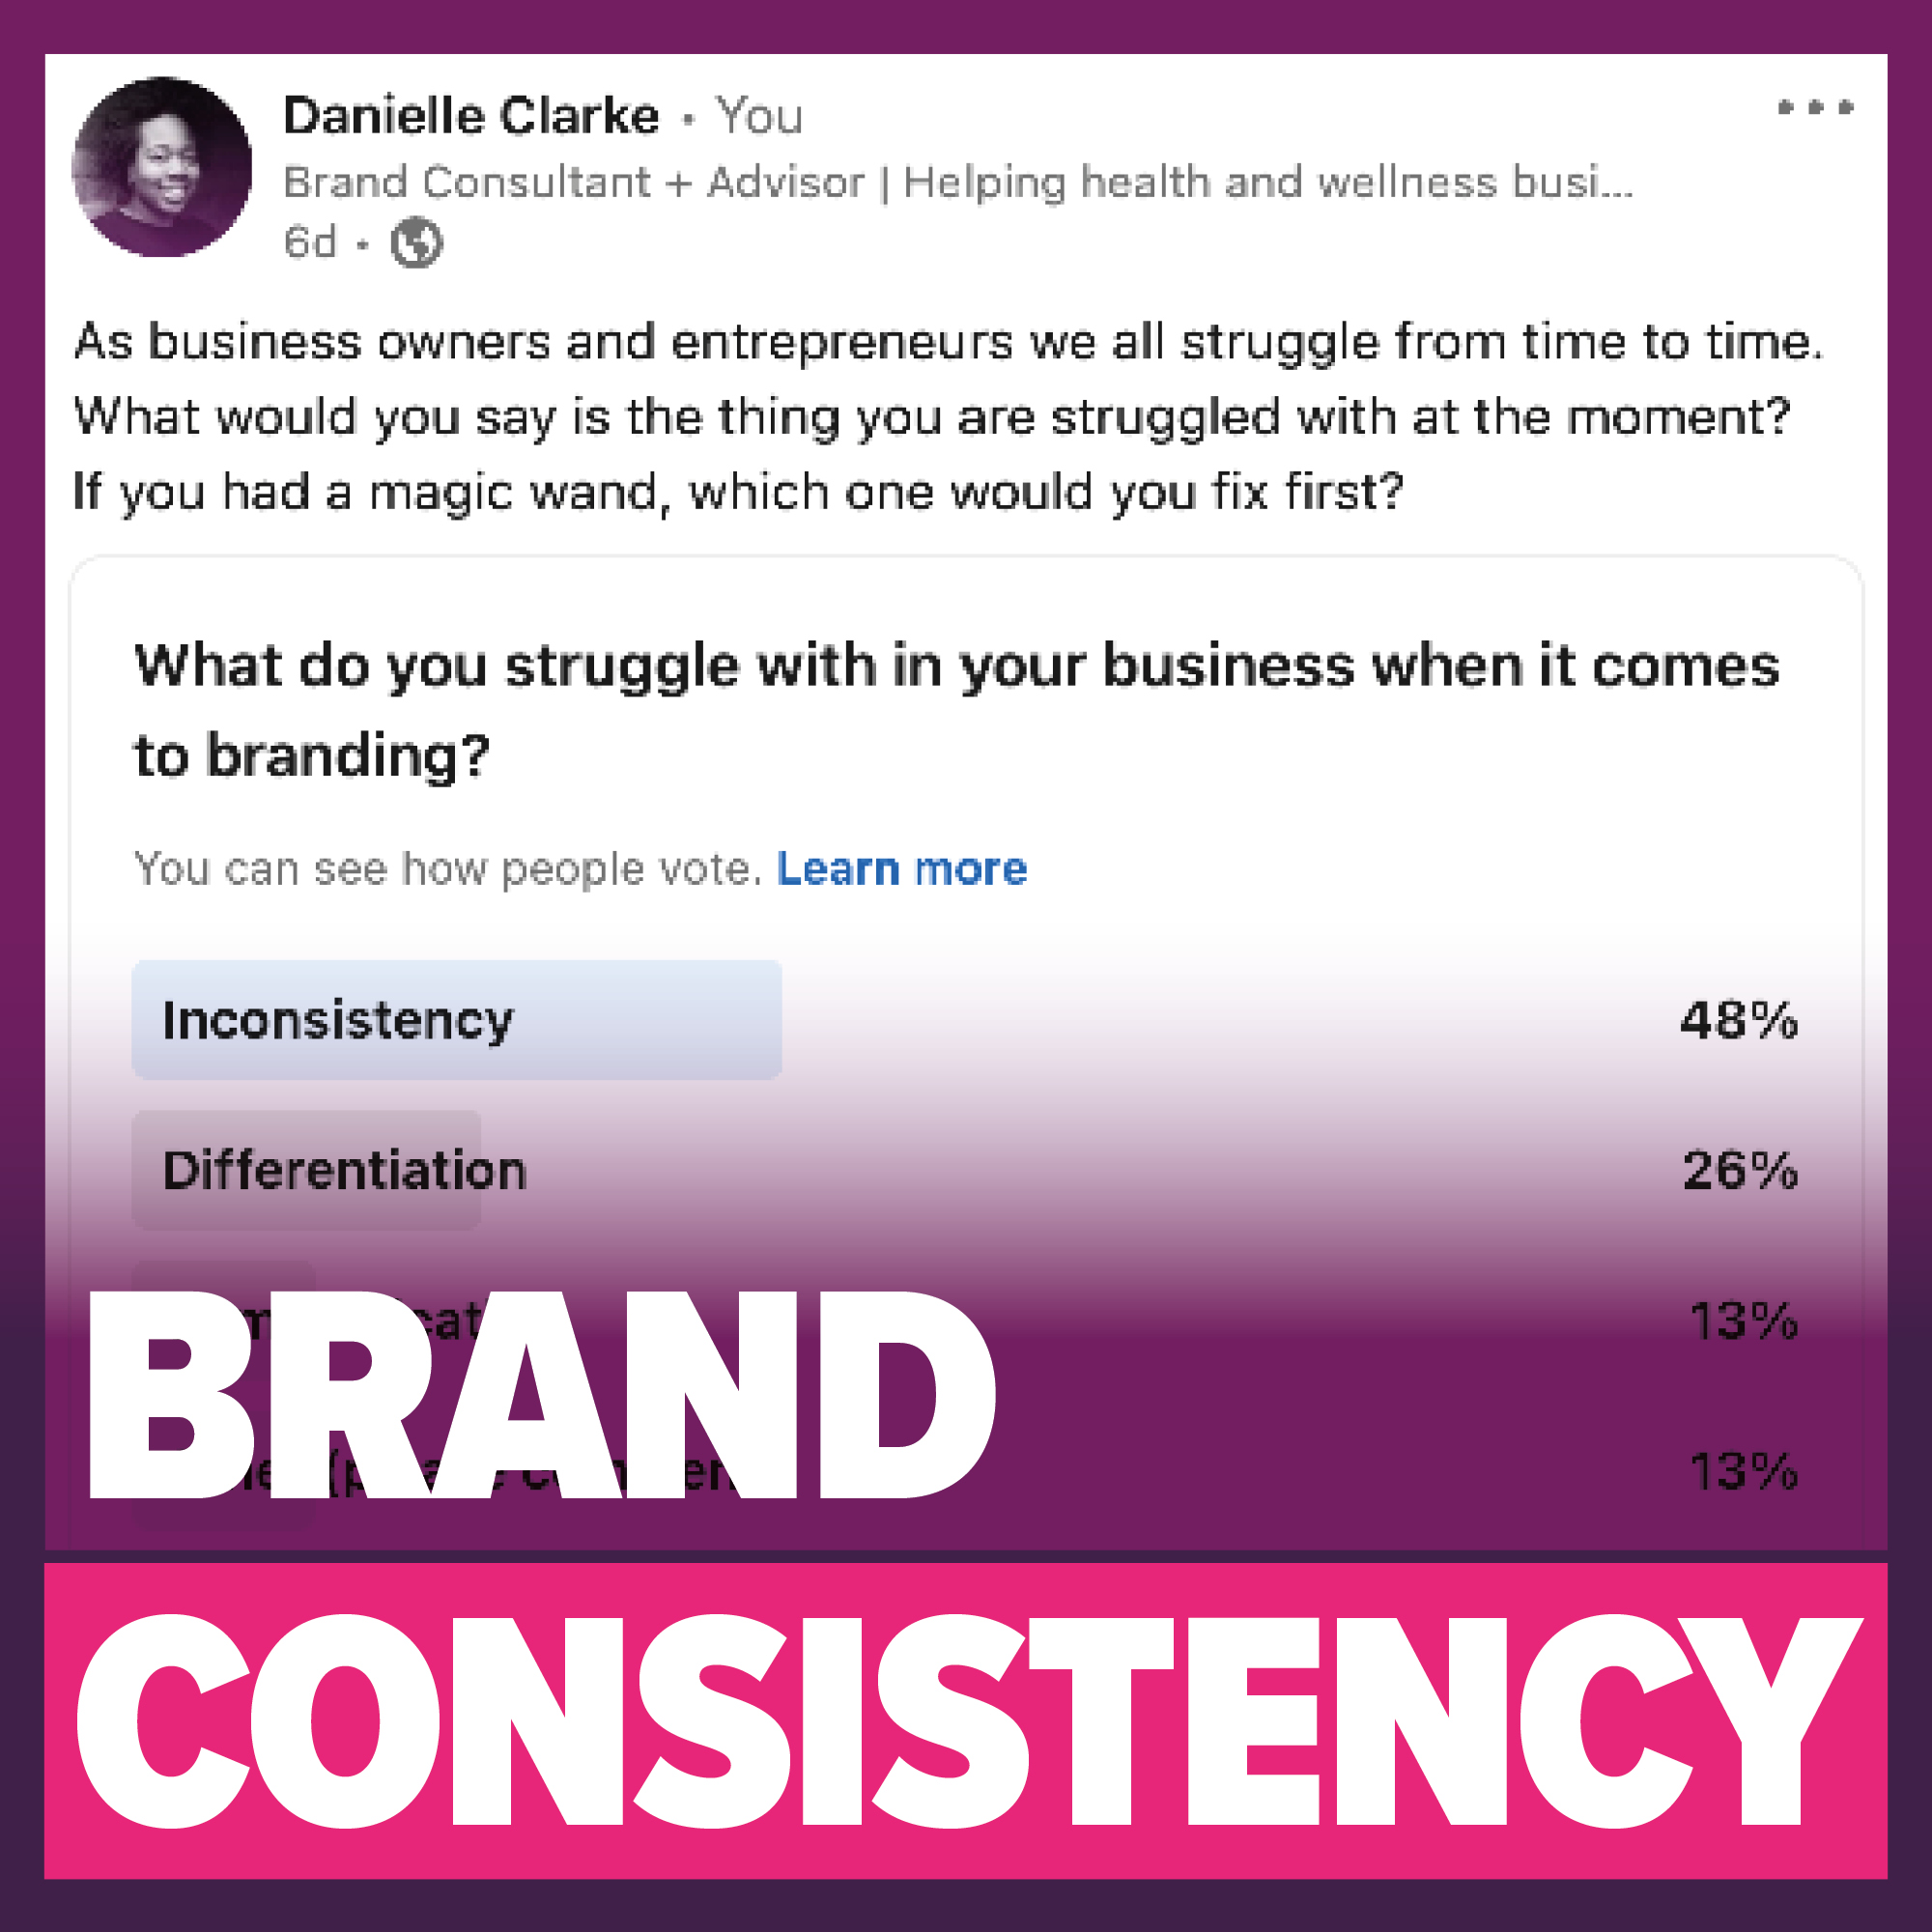 5 Simple Steps to Consistent Branding